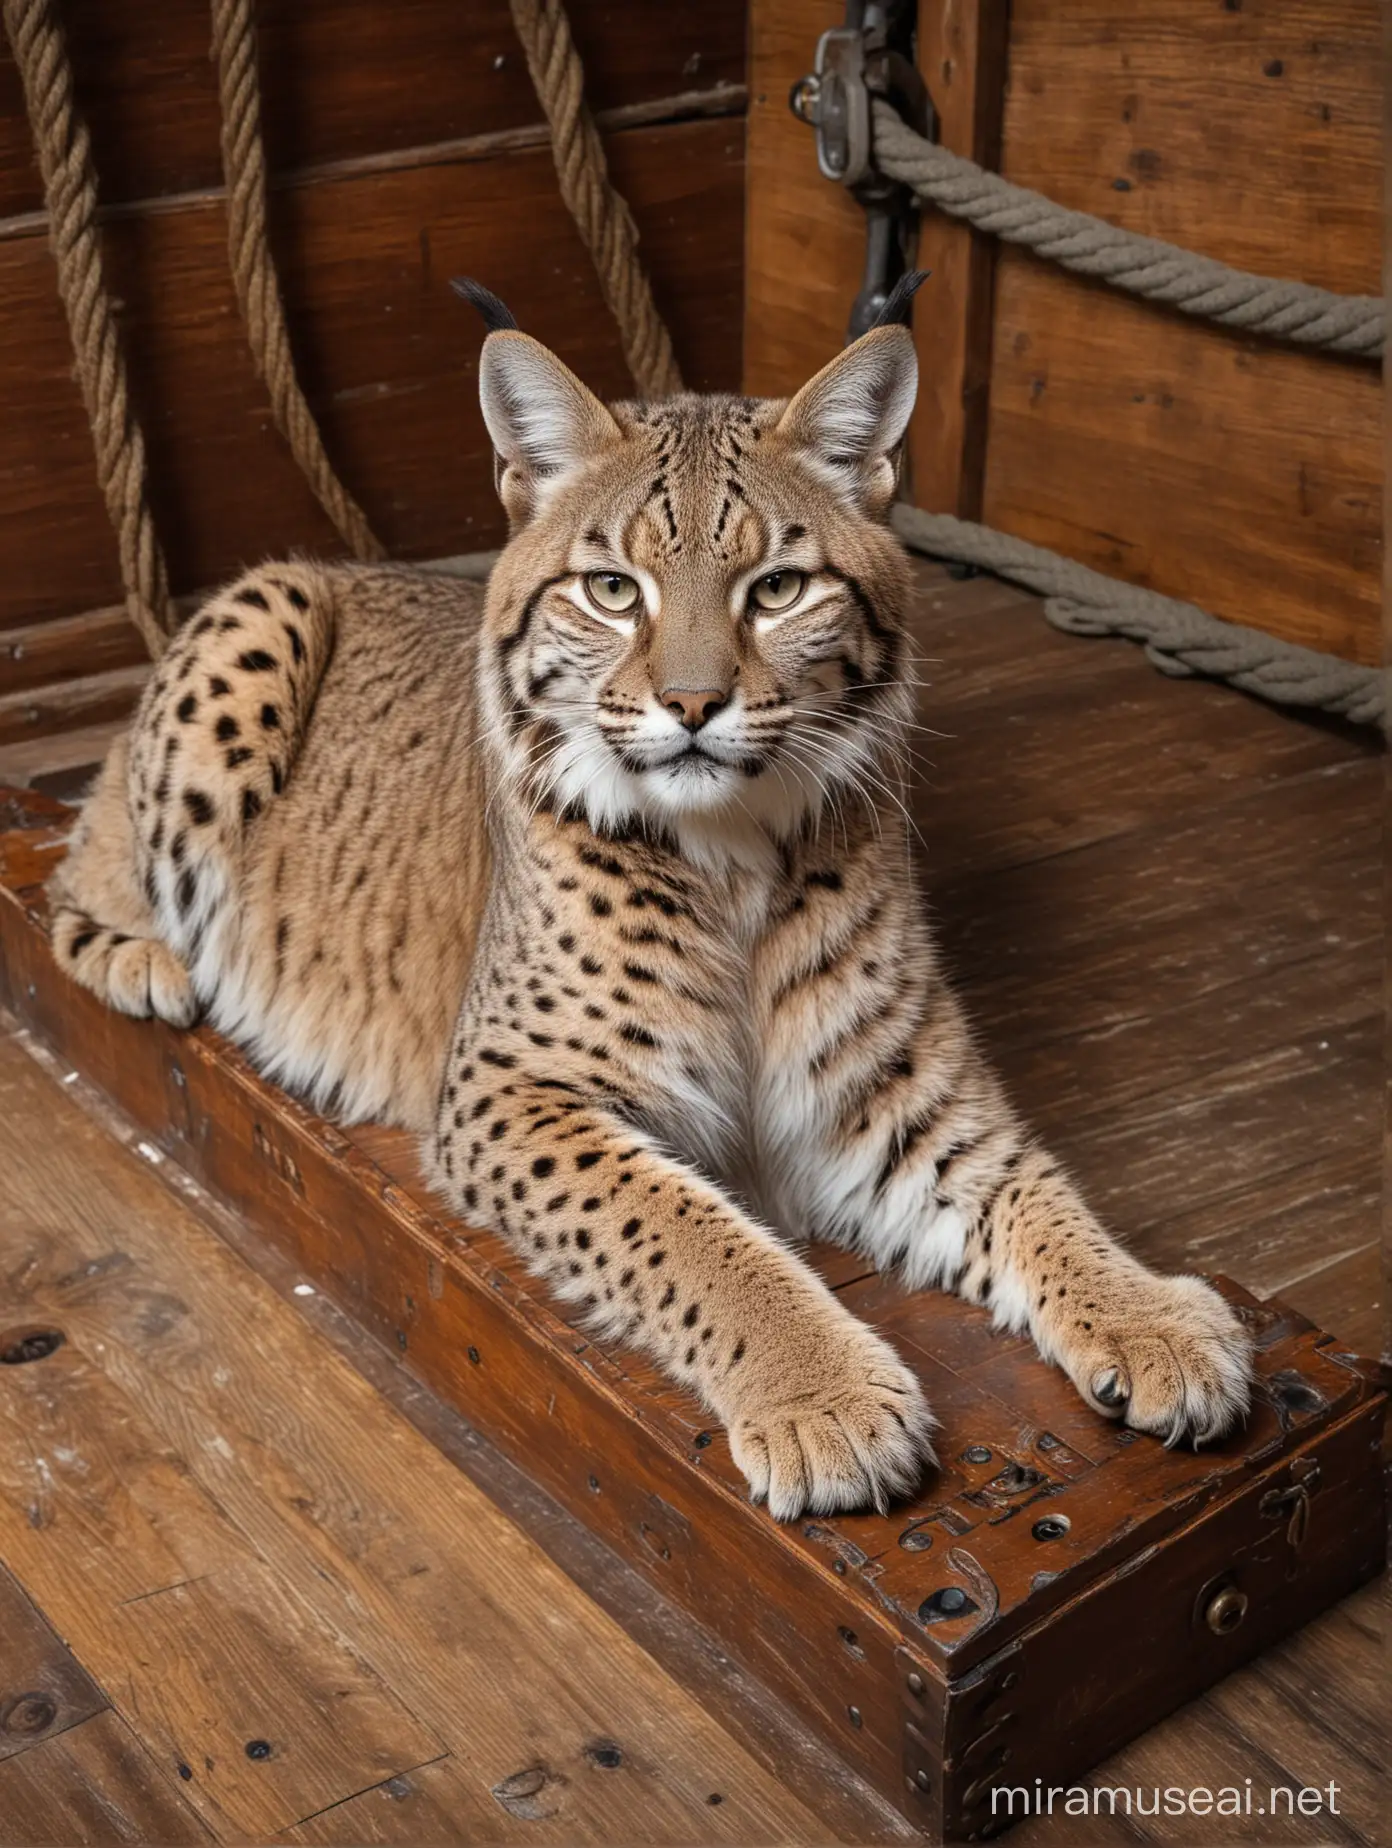 Bobcat, laying on wooden floor, on a pirate ship Captain quarters.